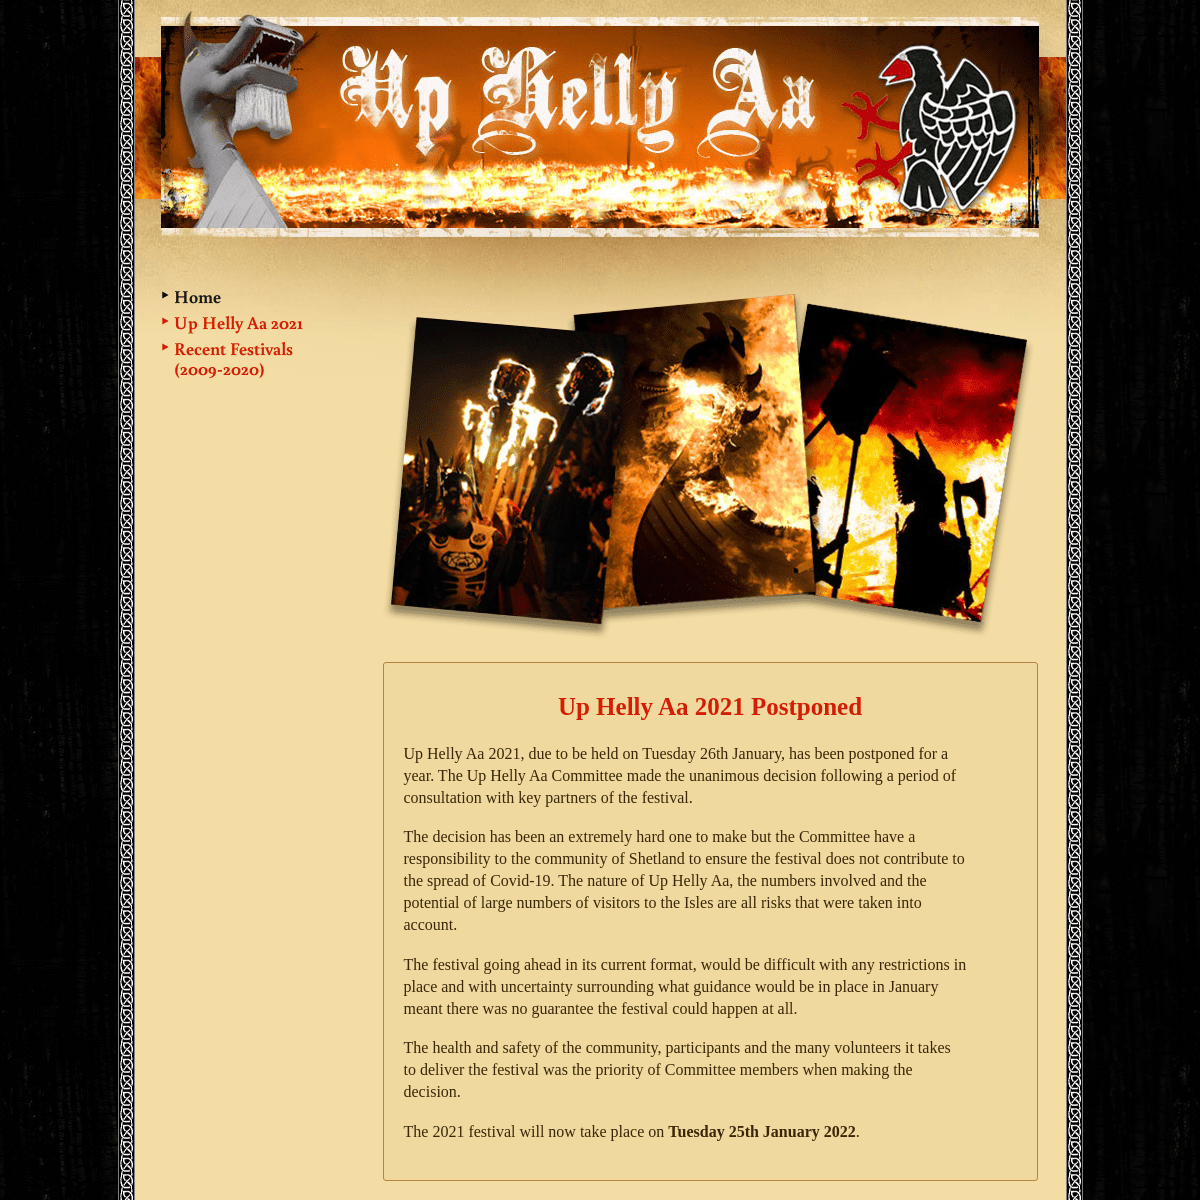 A complete backup of https://uphellyaa.org